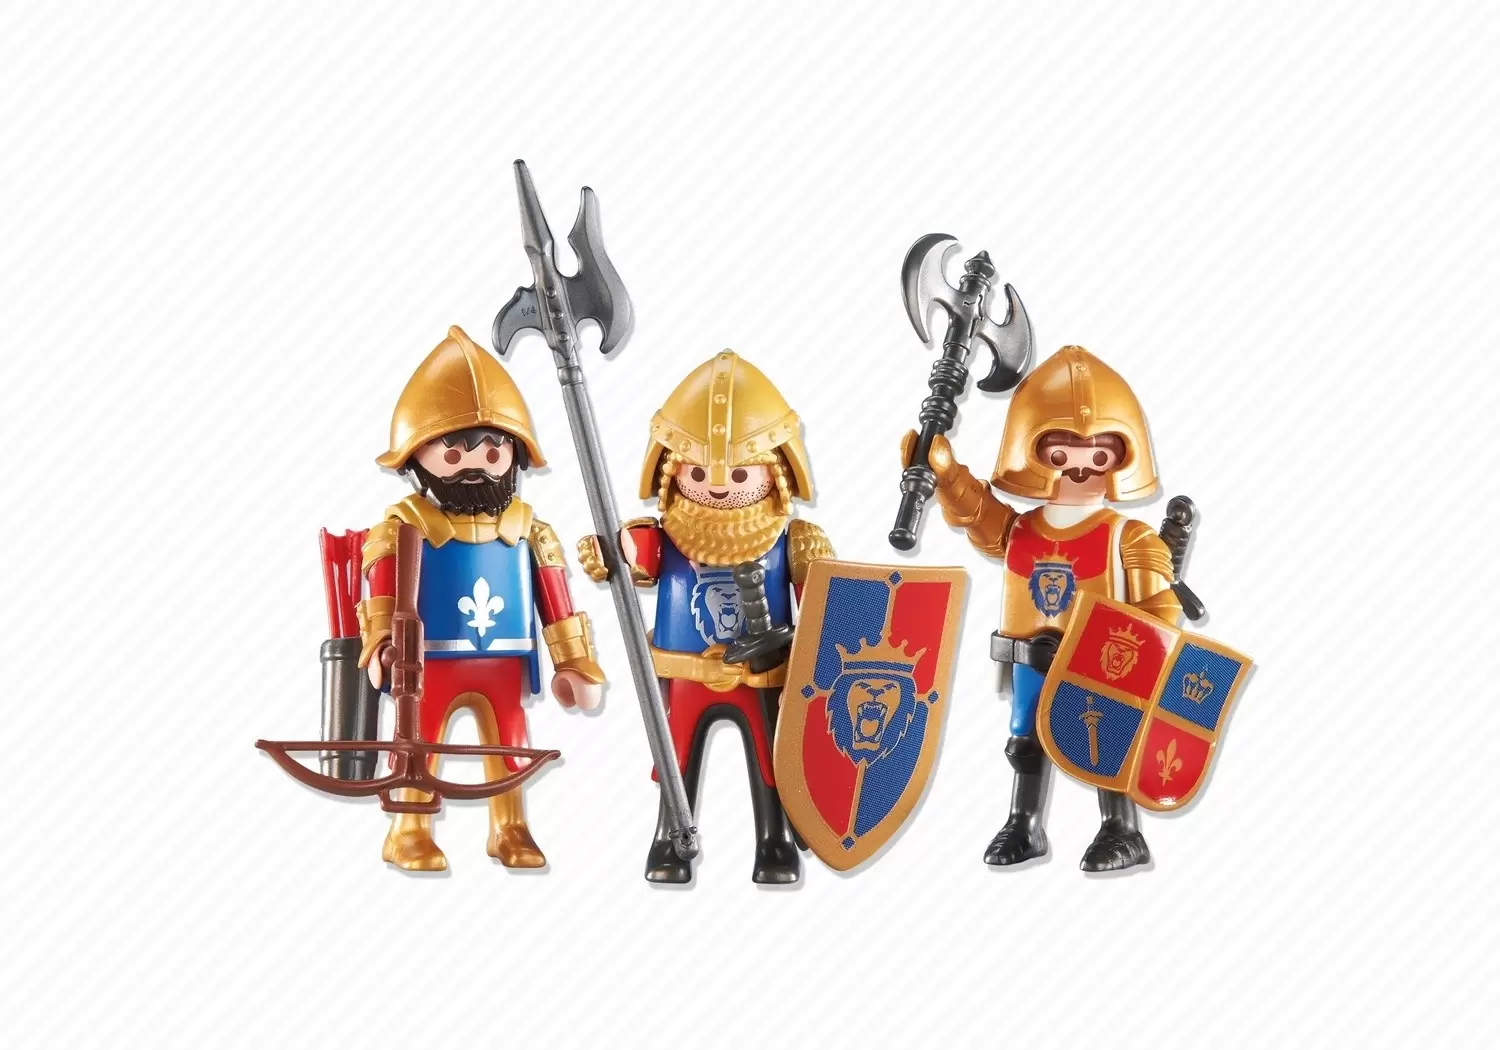 Playmobil Middle-Ages - 3 Lion knights